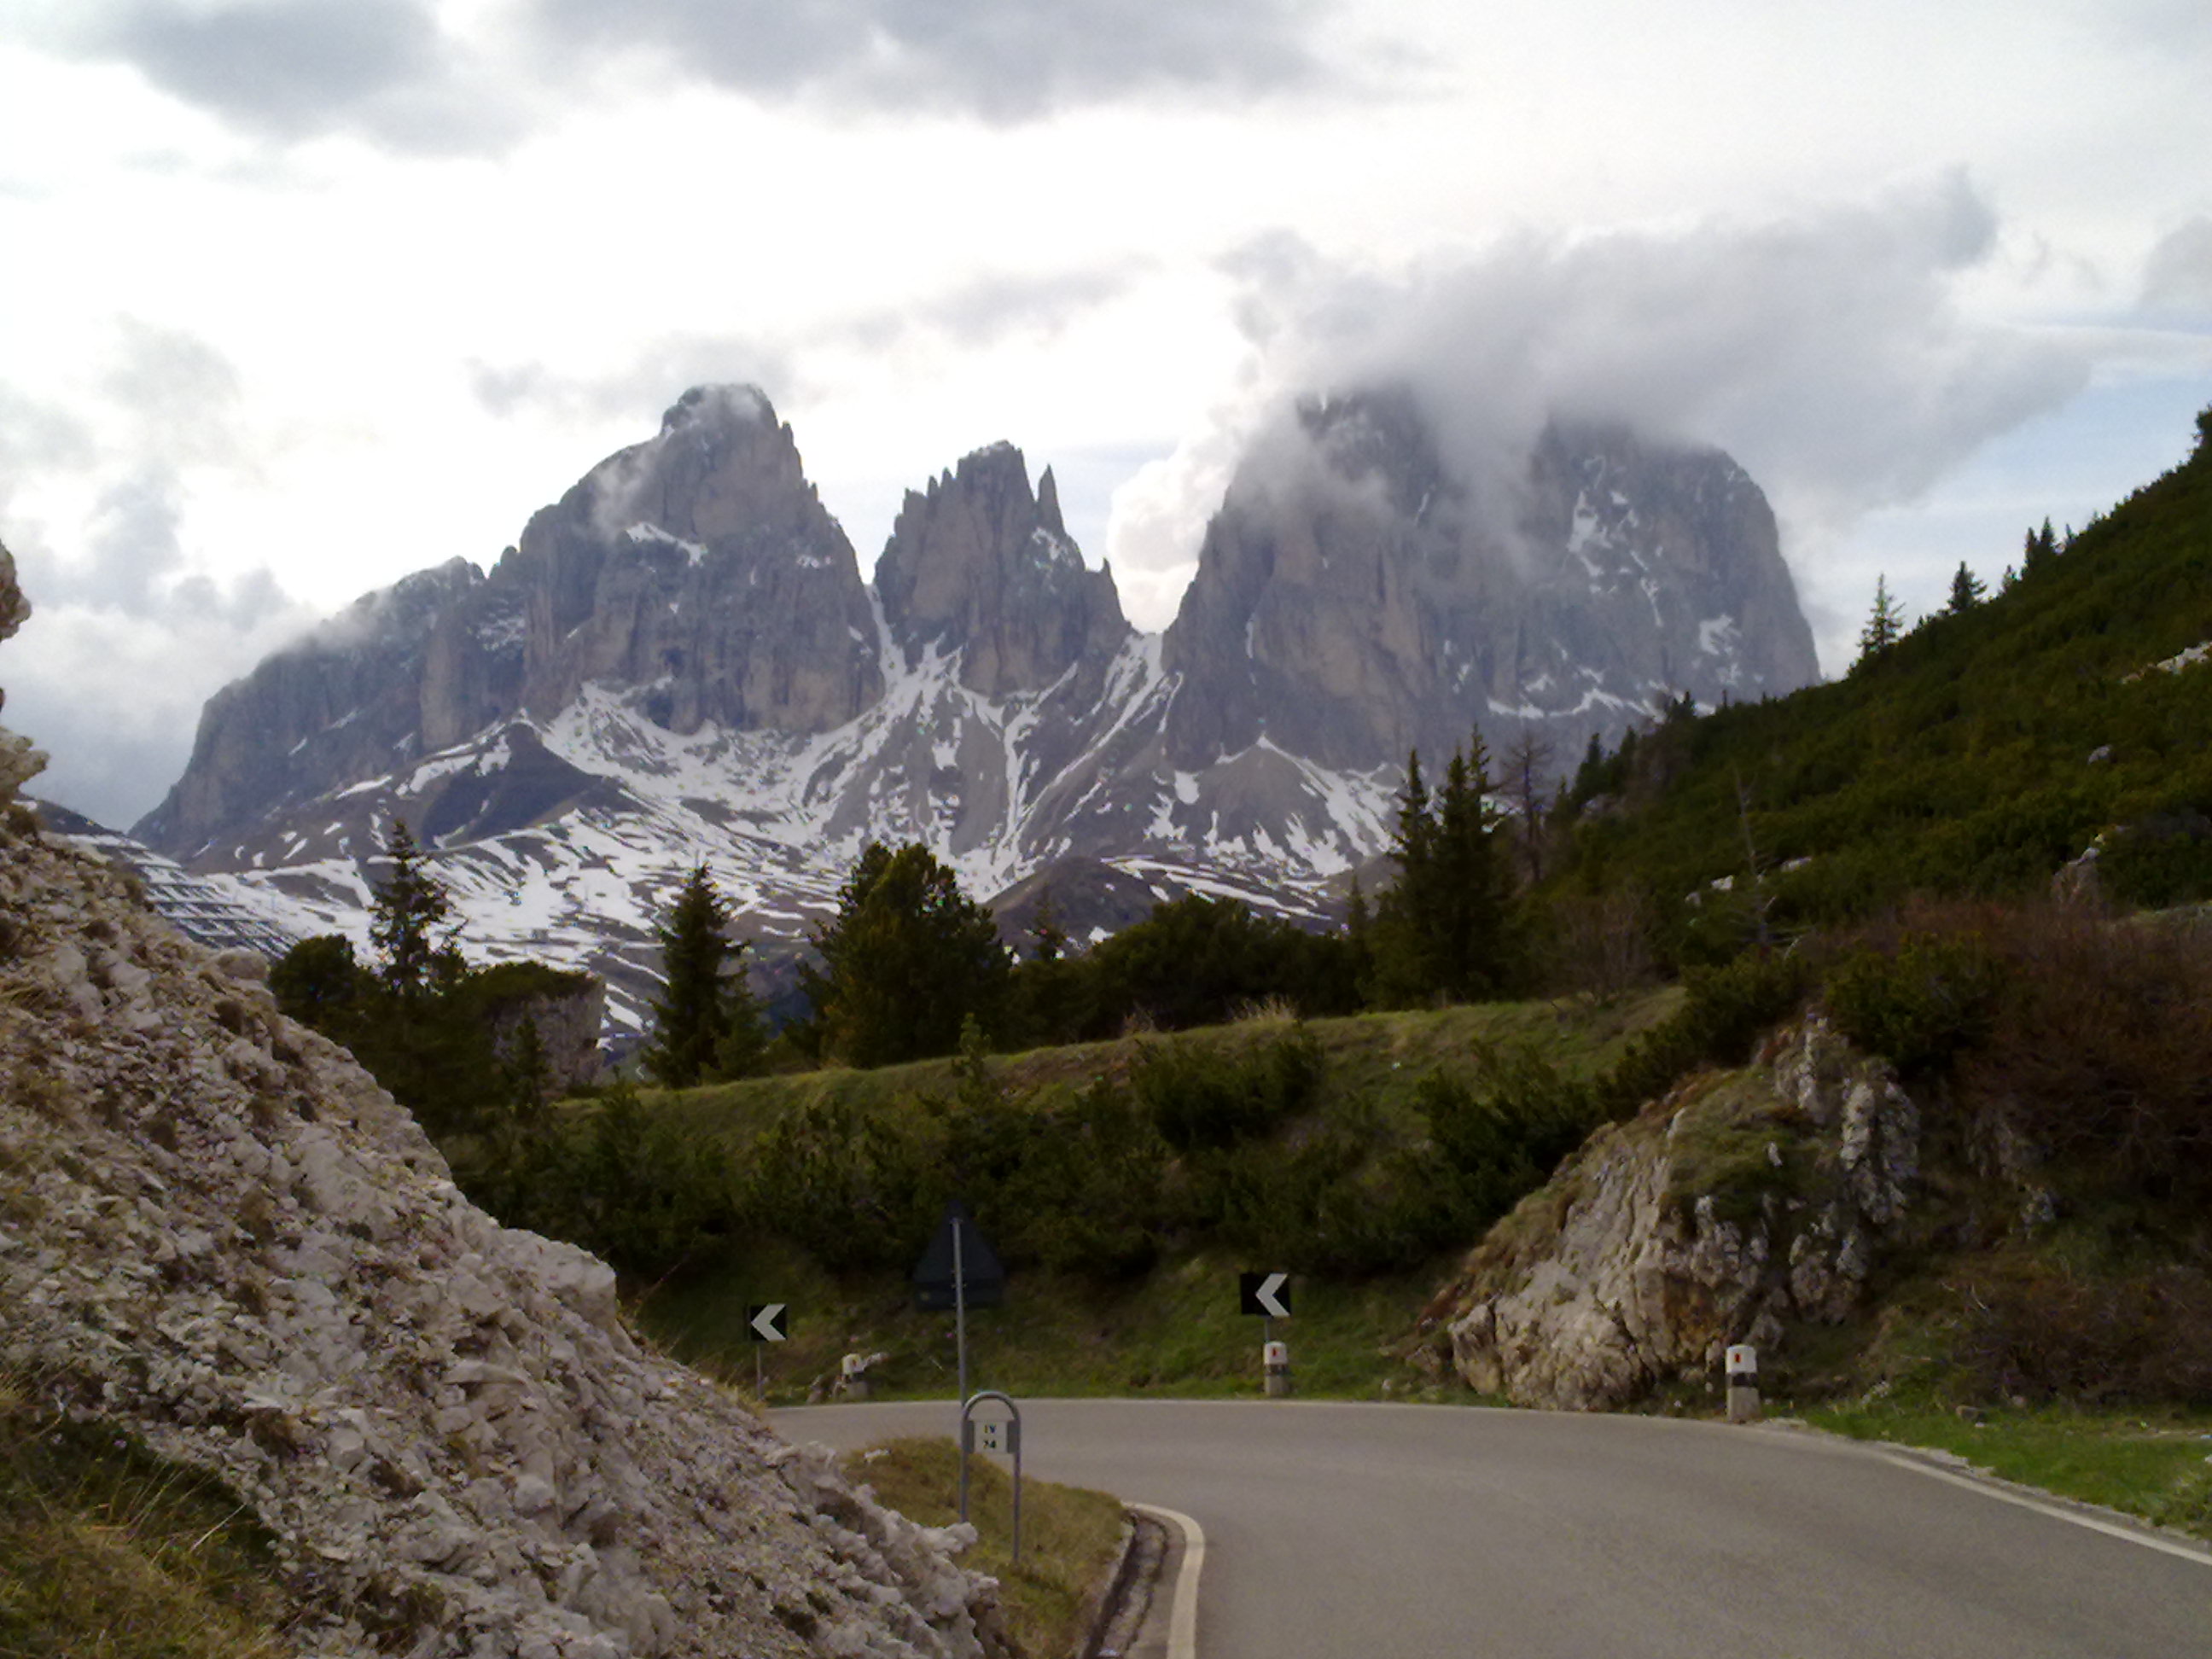 Where are the Dolomite Mountains in Italy?